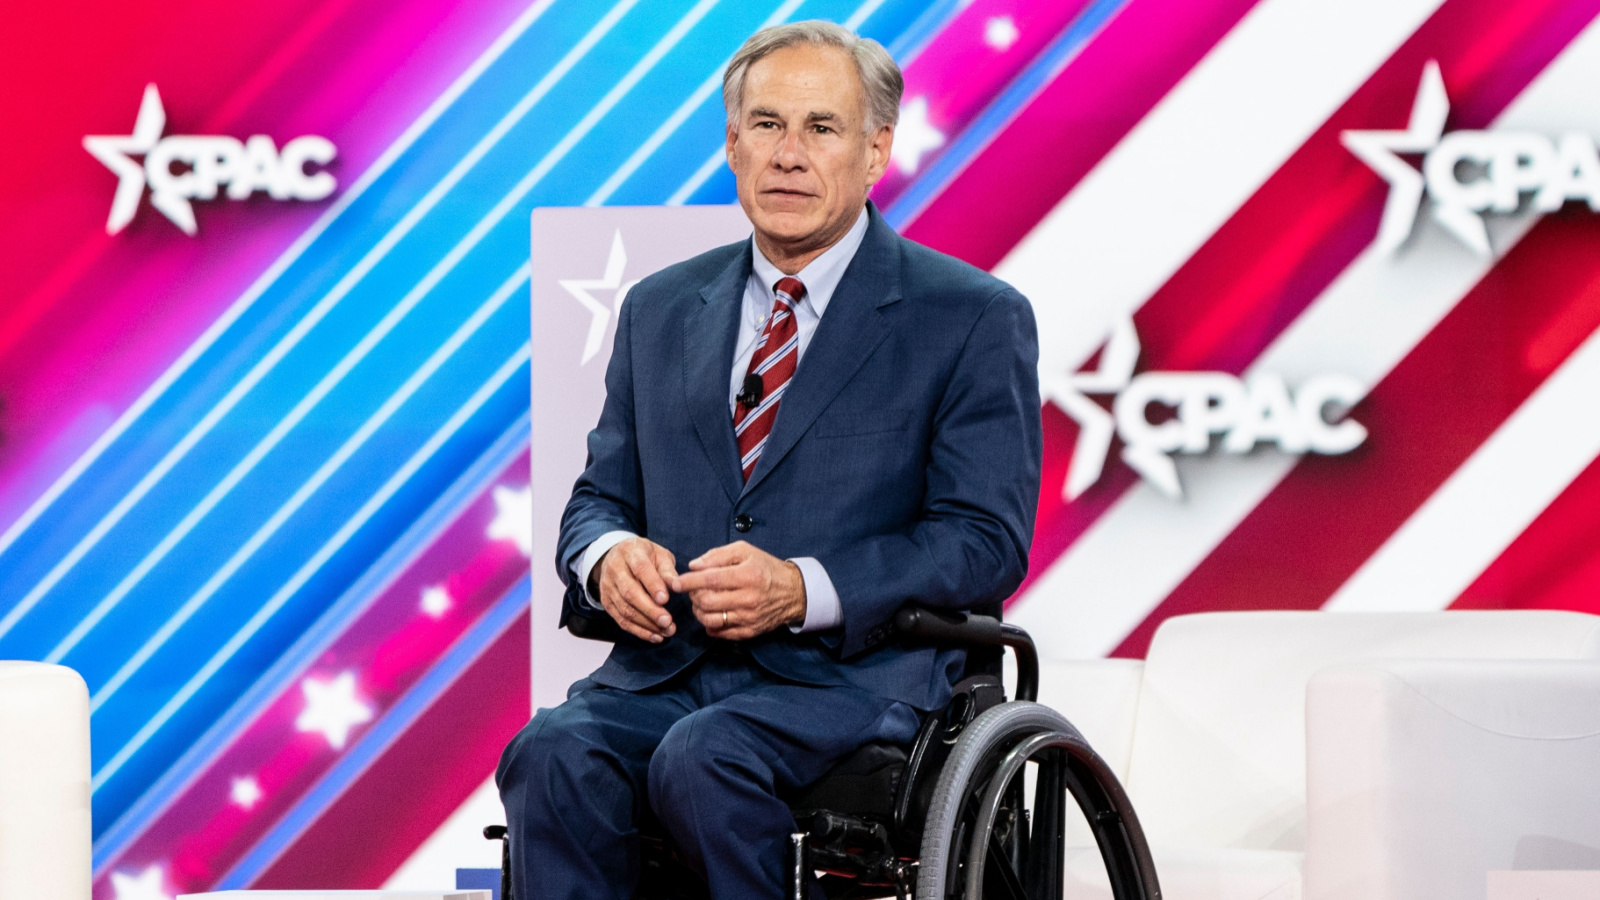 image credit: lev radin/shutterstock <p><span>The Texas governor also mentioned plans to expand the deployment of razor wire, noting its proven effectiveness in discouraging unauthorized entries. He pointed out a significant decrease in migrant encounters, which have dropped to roughly 1% of previous figures.</span></p>